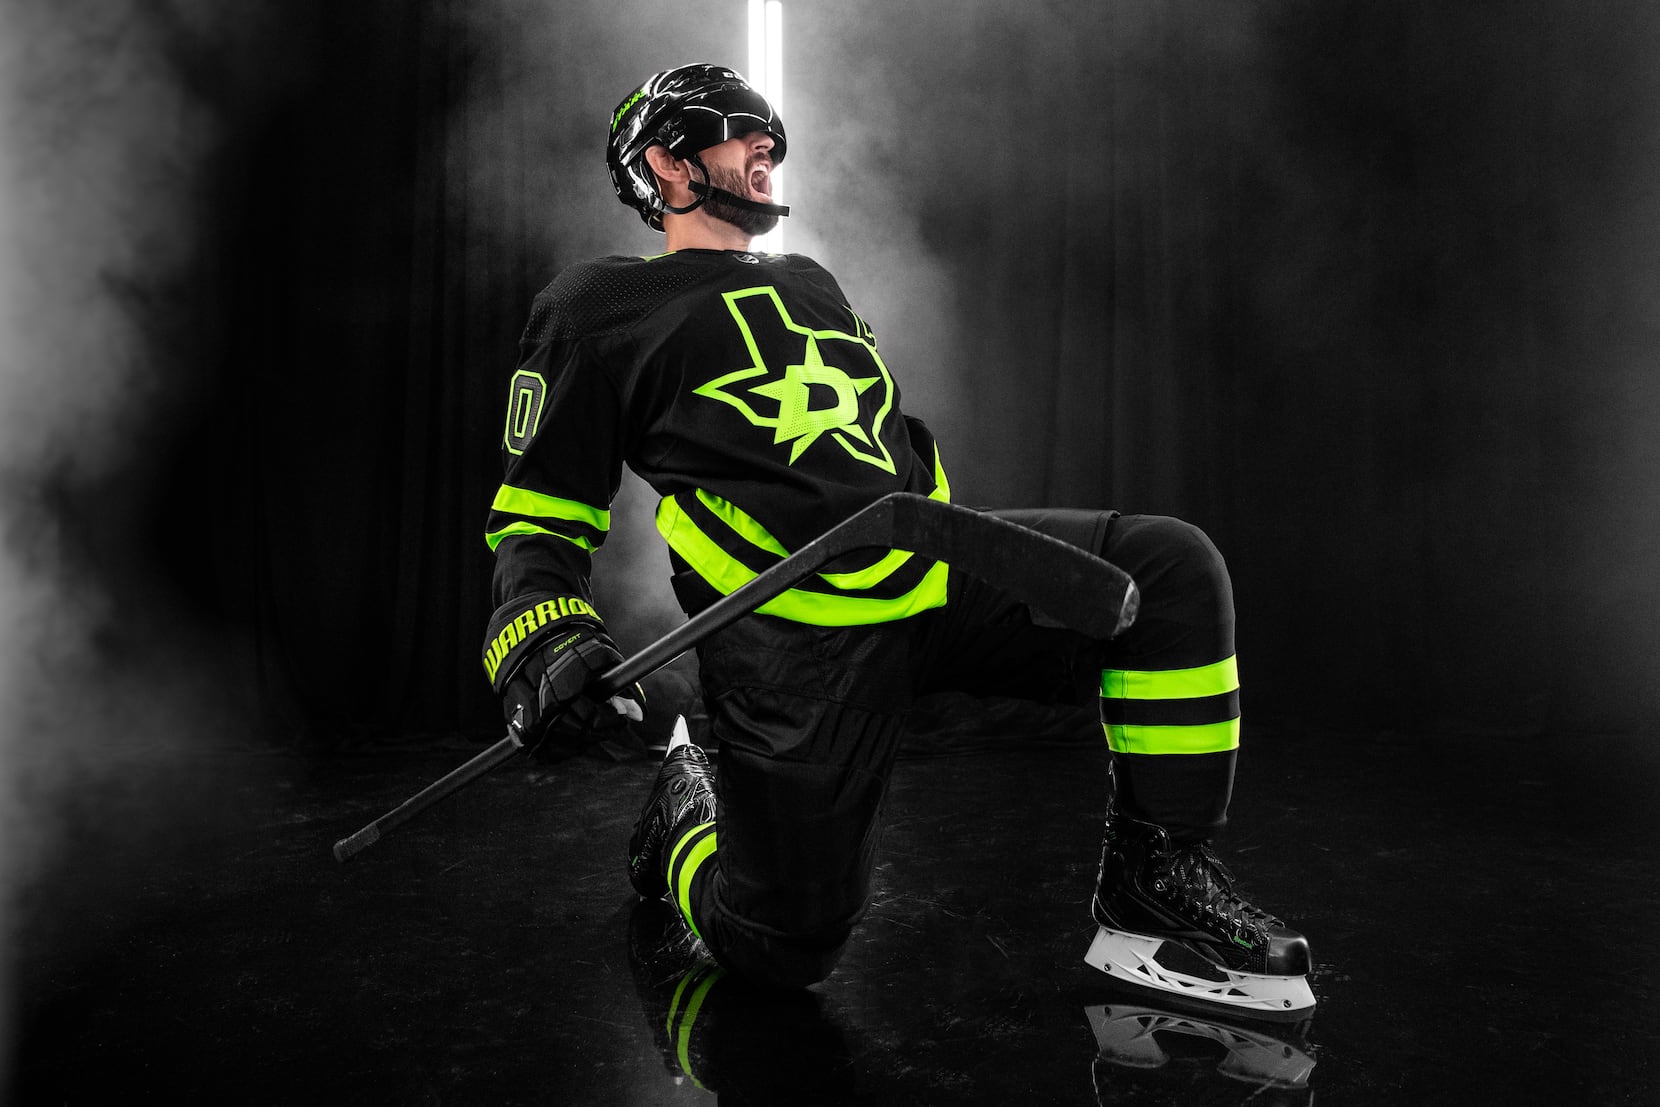  Stars preview Winter Classic look with logo reveal